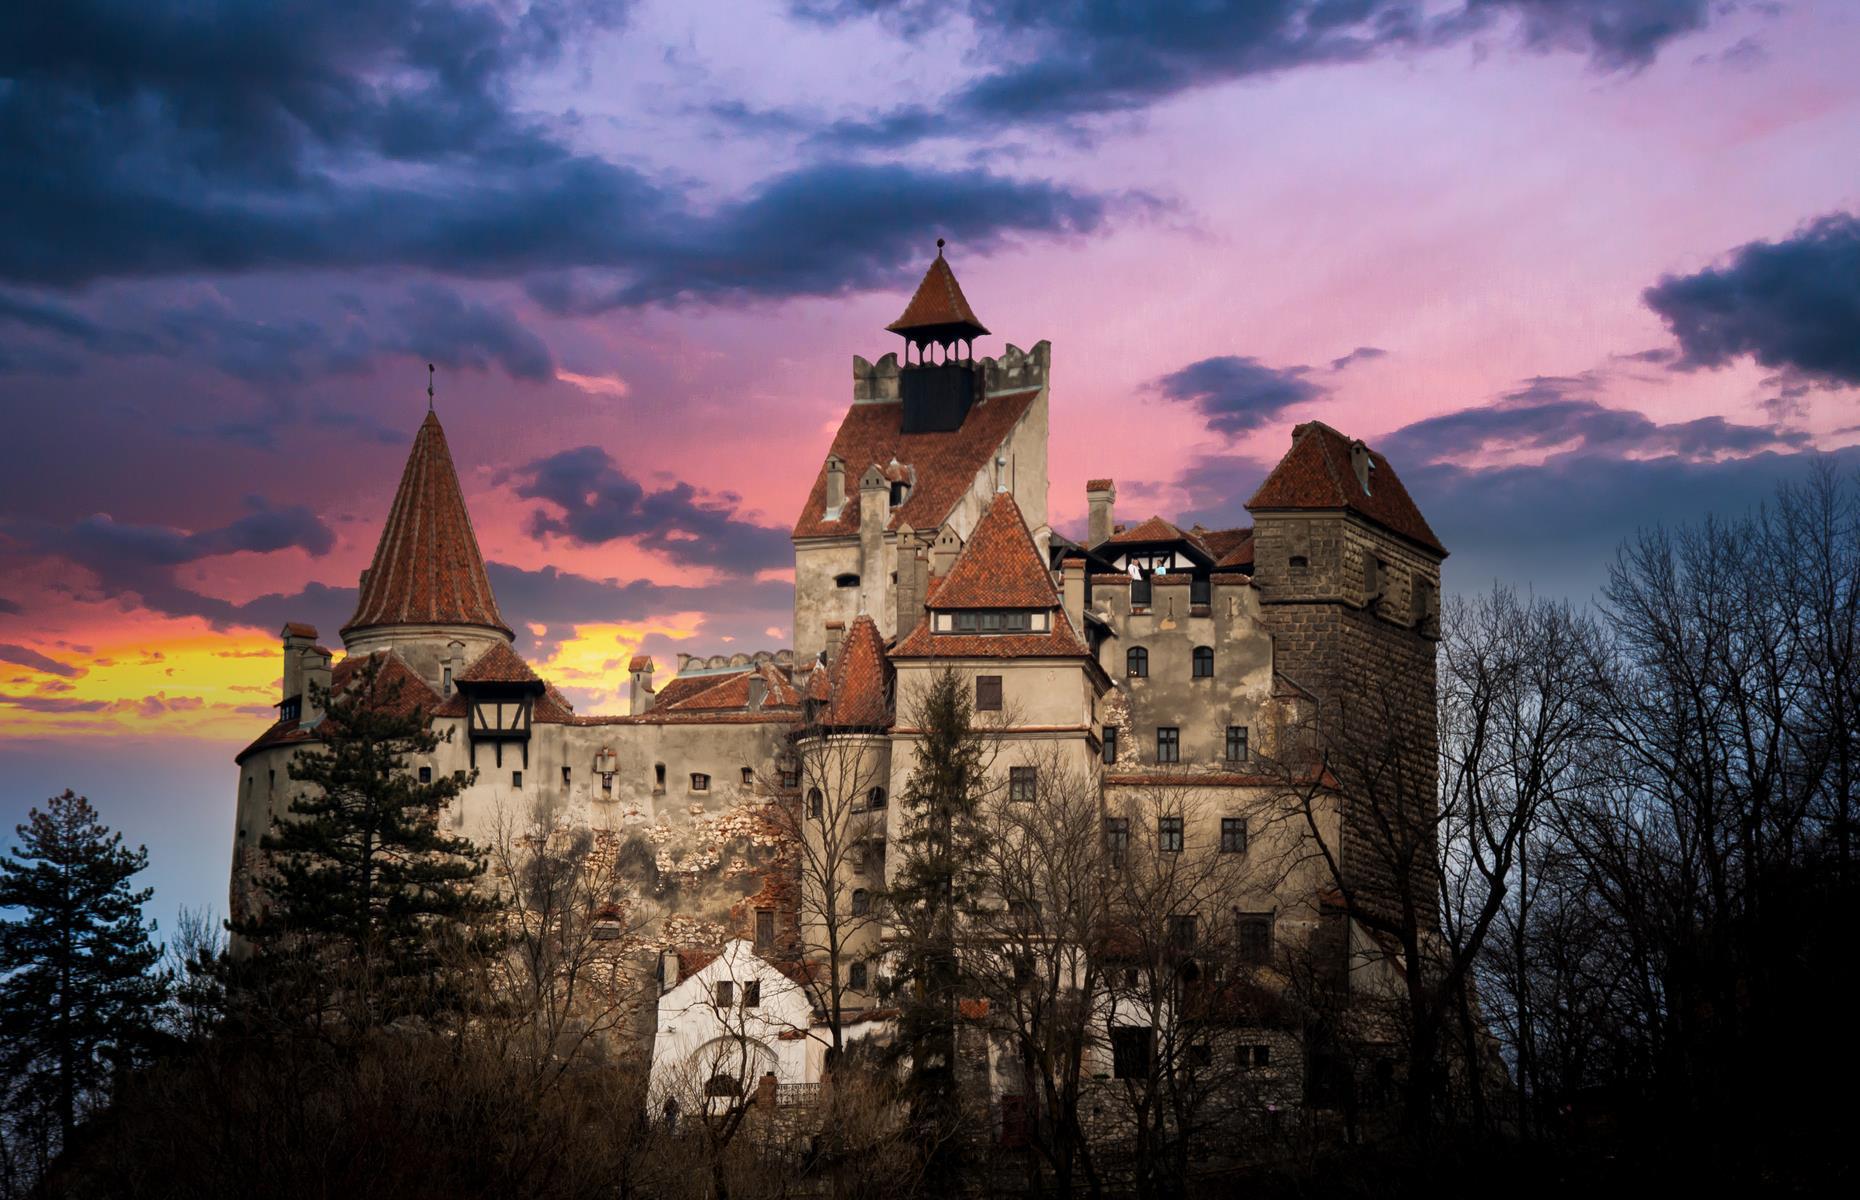 <p>The legend of Bram Stoker's famous vampire, Dracula, is what makes this castle oh-so-creepy. While there's no concrete evidence that Stoker ever even visited Romania, let alone set foot in <a href="http://www.bran-castle.com/">this eerie fortress</a>, much of the description matches up and the two remain intrinsically connected. Now visitors can tour the haunting castle and even see macabre sights like medieval torture devices. There are <a href="https://bilete.castelulbran.ro/en/halloween2021.html">special tickets for Halloween time too</a>.</p>  <p><strong><a href="https://www.loveexploring.com/galleries/108988/europes-eerie-abandoned-castles">Now explore Europe's creepy abandoned castles</a></strong></p>